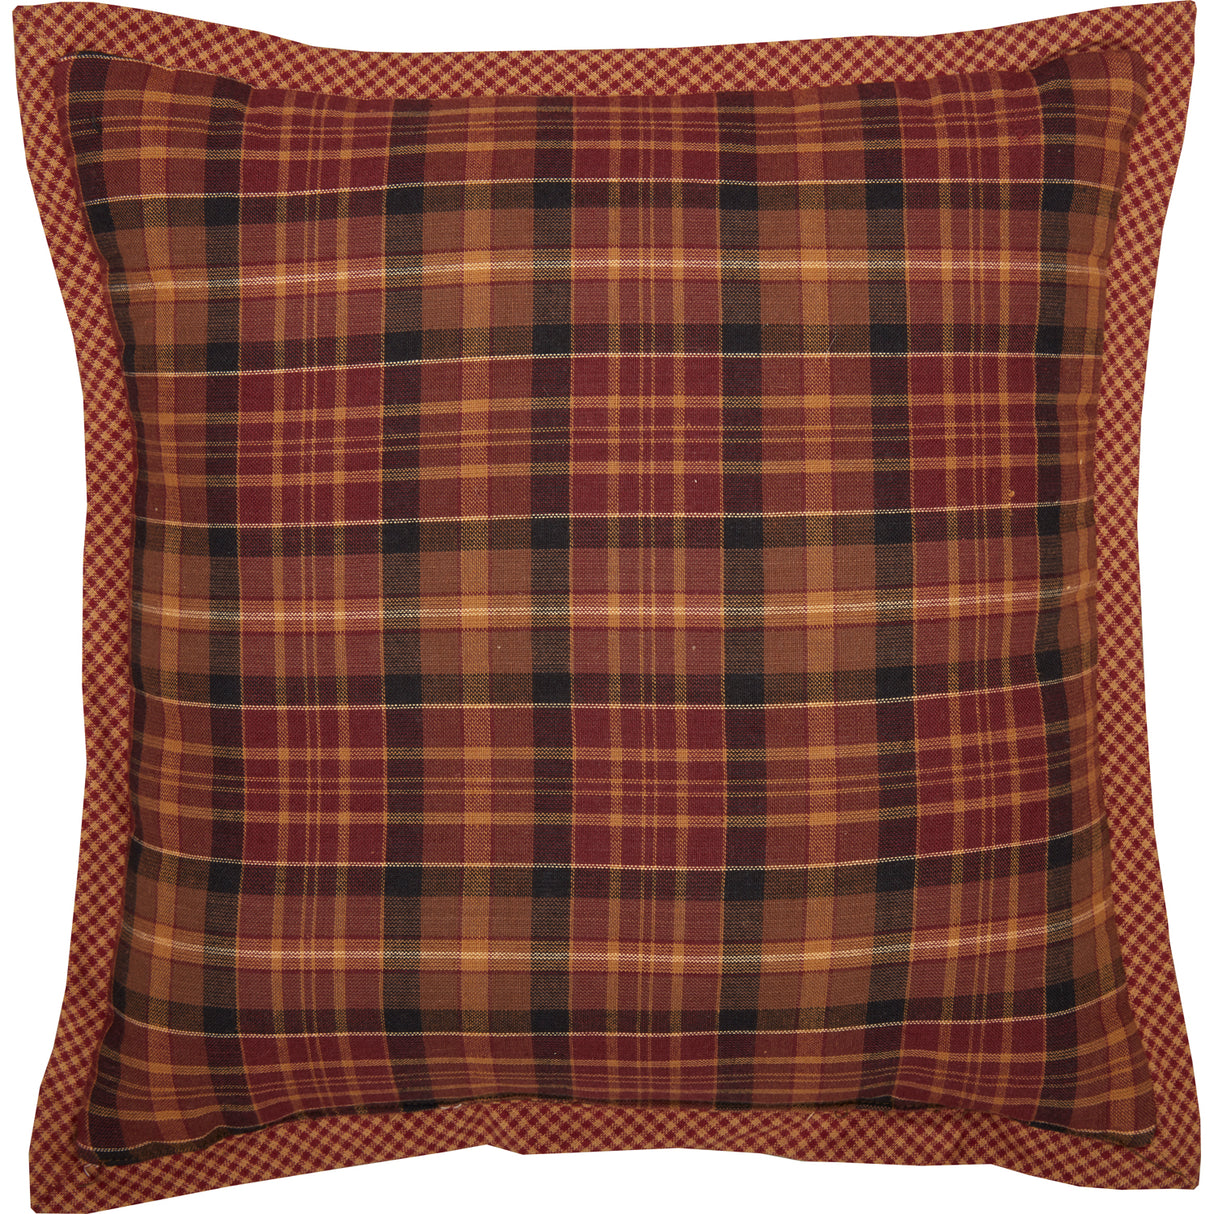 56622-Abilene-Star-Quilted-Pillow-12x12-image-5